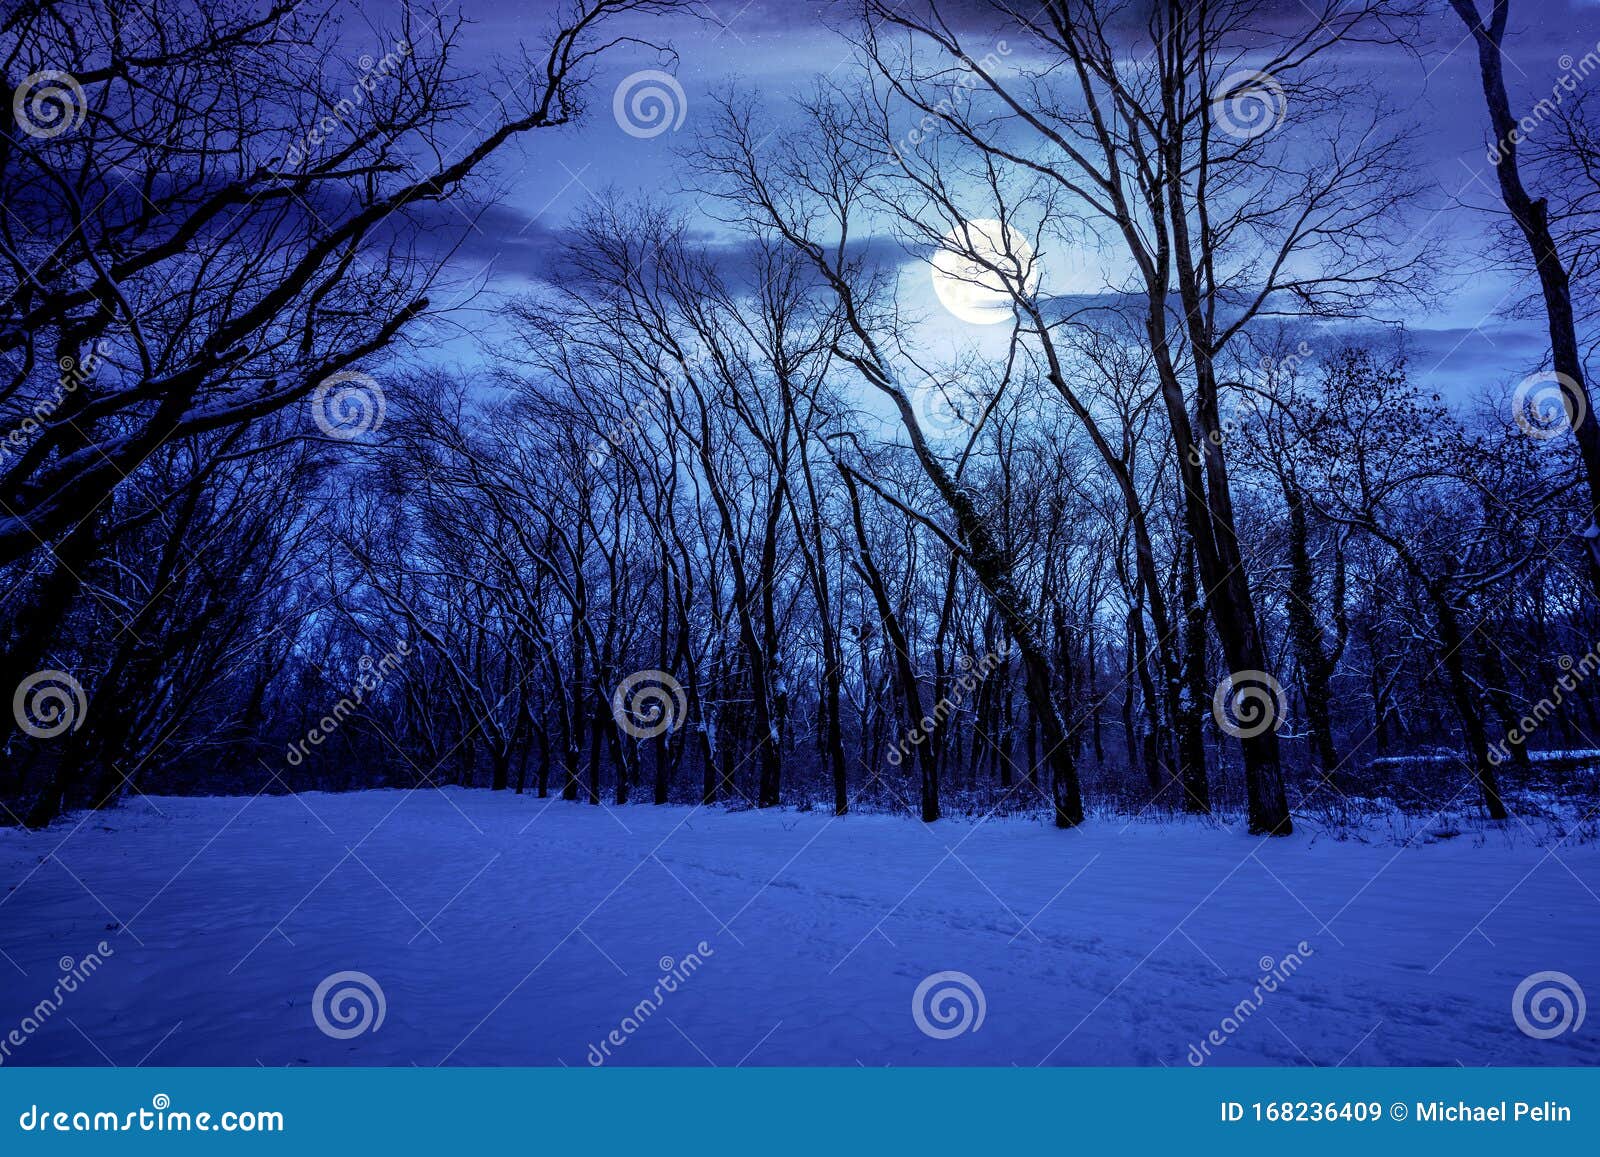 39 958 Winter Forest Night Photos Free Royalty Free Stock Photos From Dreamstime